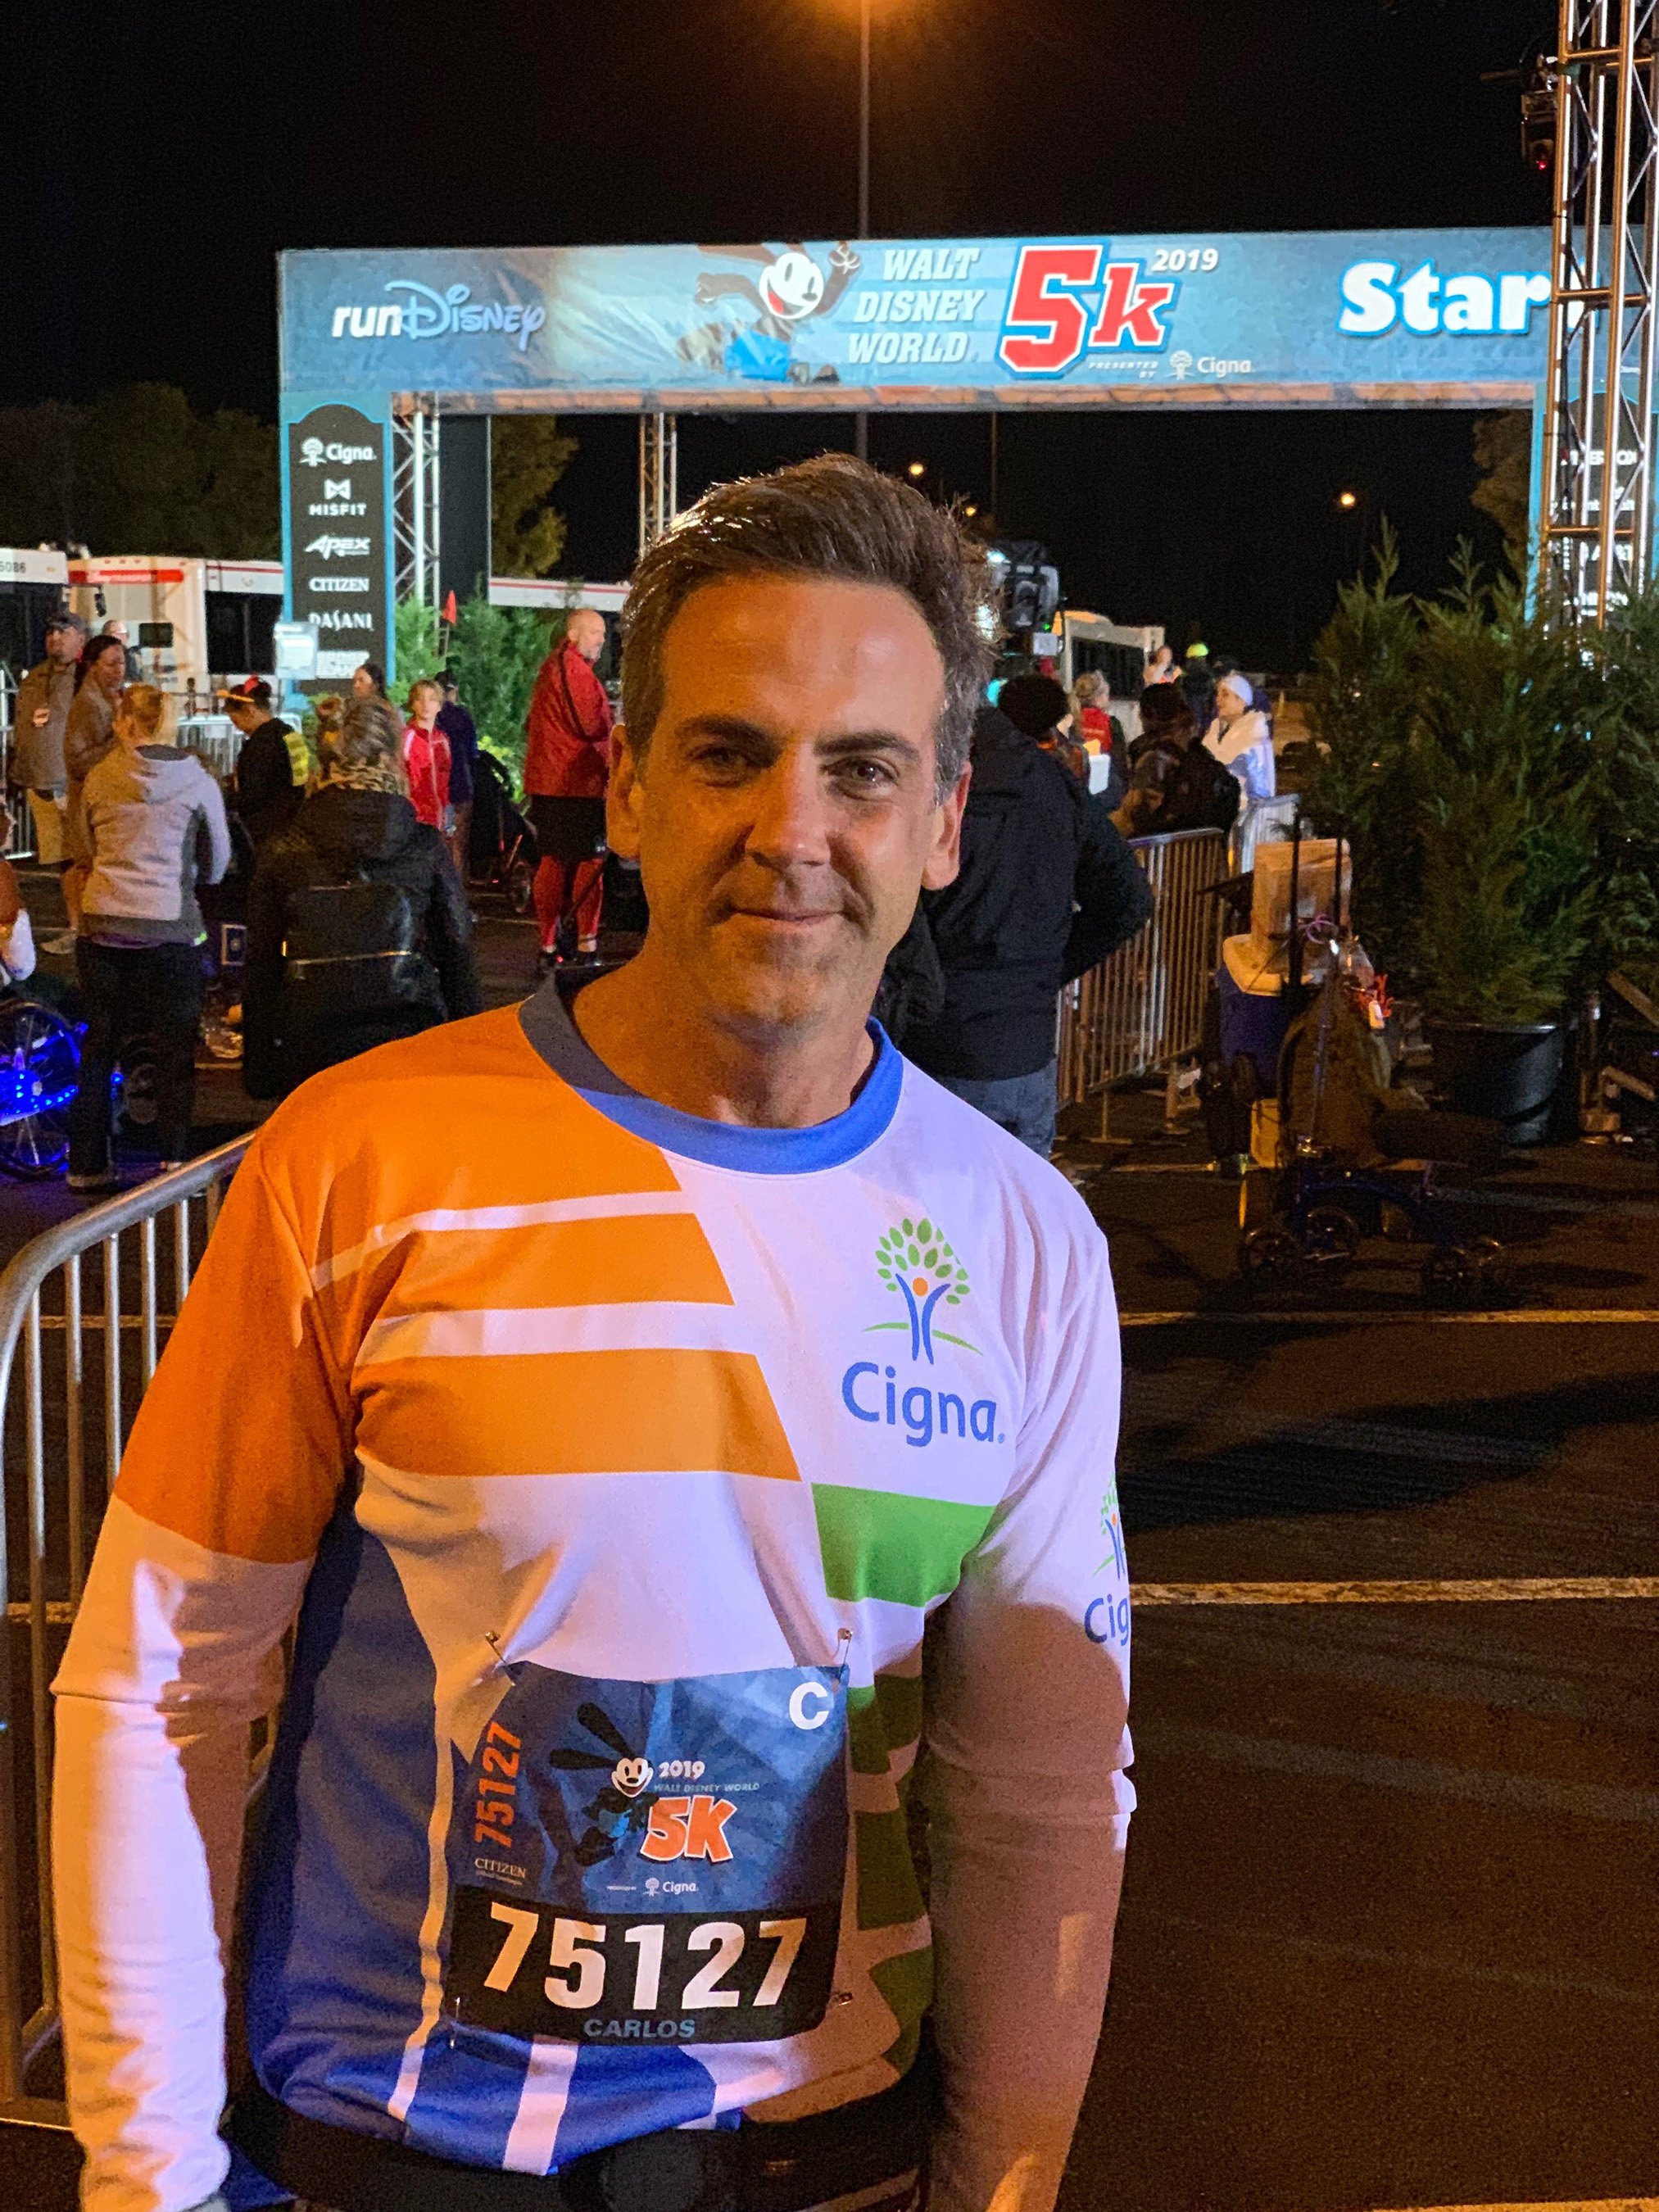 Renowned Latino actor Carlos Ponce joins Cigna's mission of educating the community about the importance of preventive care at the 2019 Walt Disney World 5K run presented by Cigna.